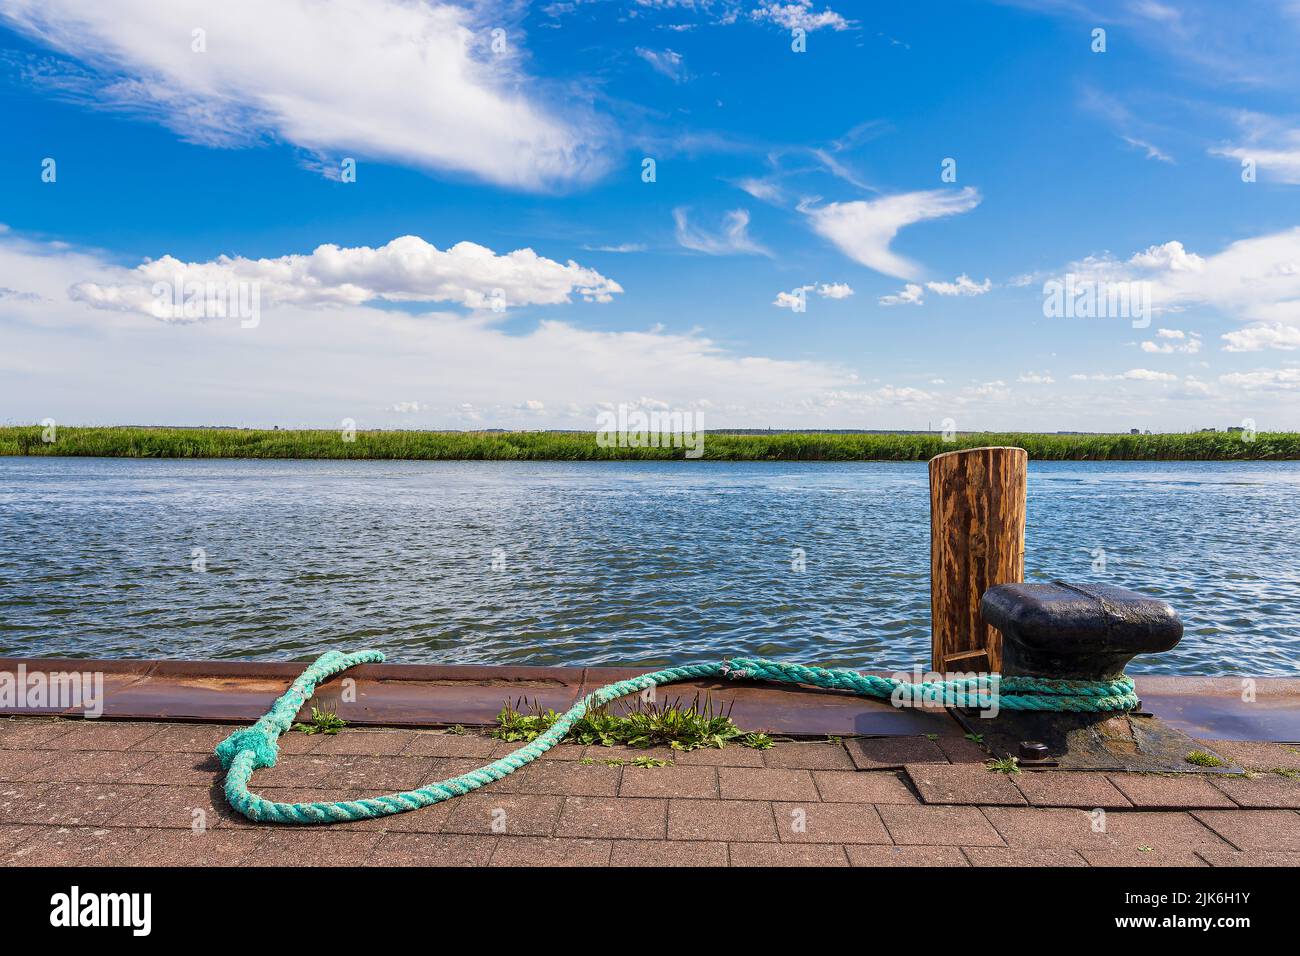 Landing stage in the port of Wieck, Germany. Stock Photo